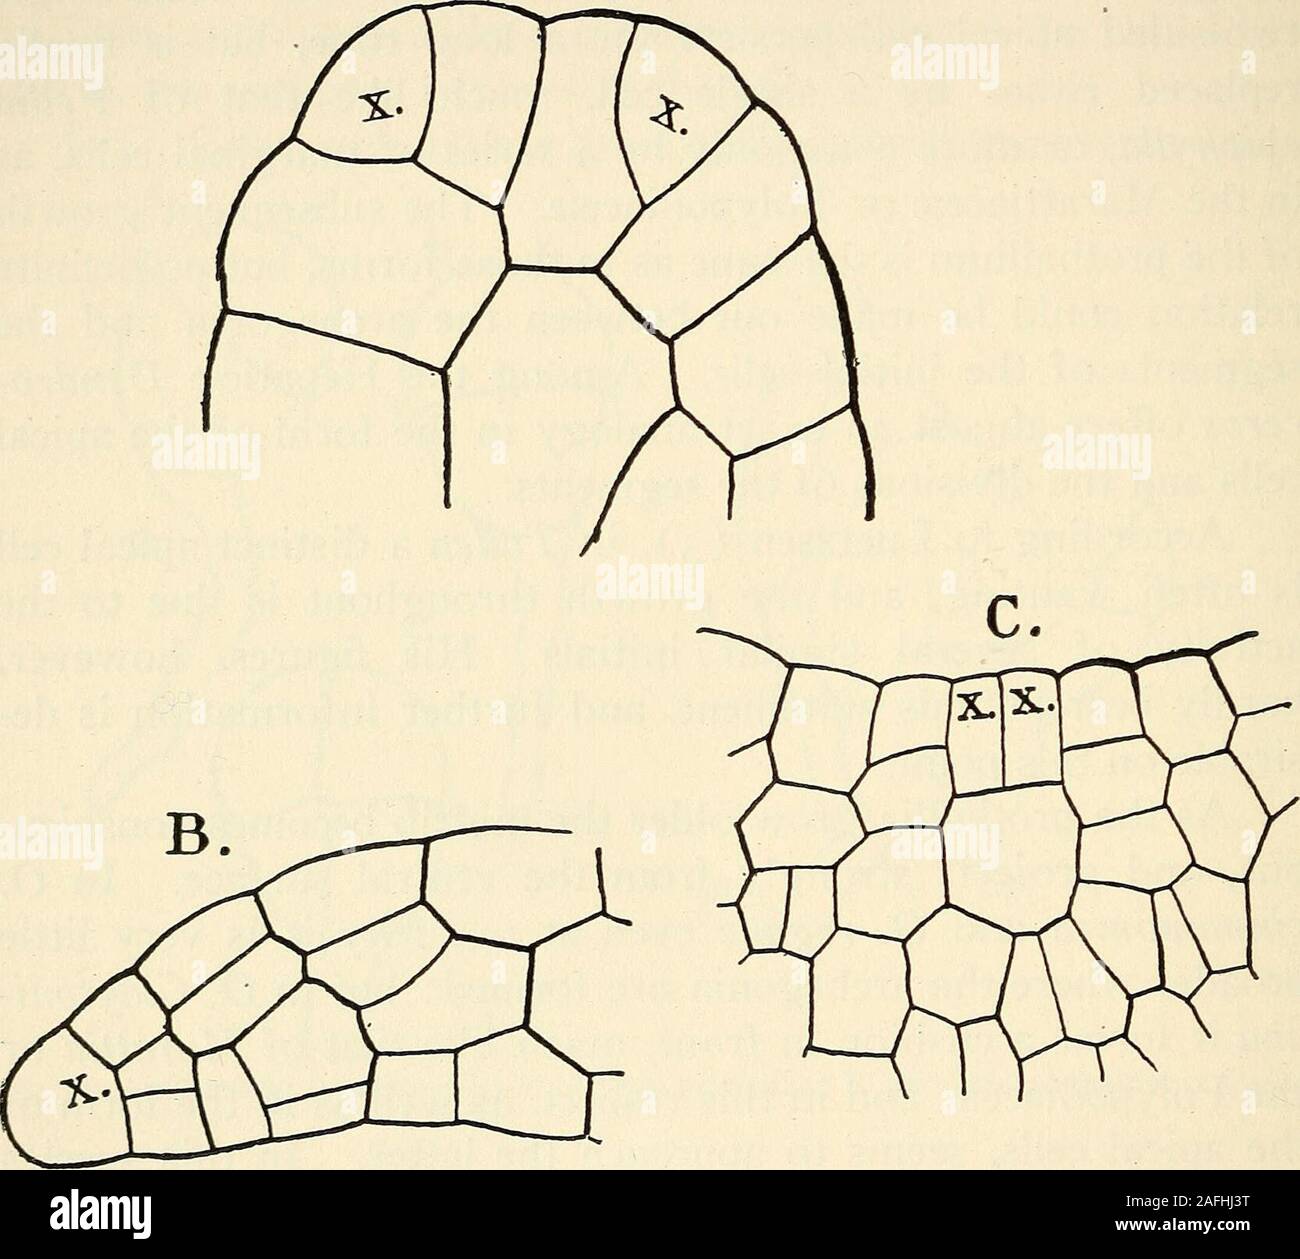 . The structure and development of mosses and ferns (Archegoniatae). n colour and fleshy texture 0. cin-namomea recalls Anfhoceros Iccvis or Marattia. Where a cell mass is formed at first, this condition is tem-porary, and an apical cell is established which gives rise to theordinary flat prothallium. The small male prothallia, which areproduced in large numbers, exhibit various irregularities andquite commonly do not show any definite apical growth, and inO. Claytoniana especially often branch irregularly, or in somecases there is a true dichotomy (Fig. 193, A.) Slender fila-mentous prothalli Stock Photo